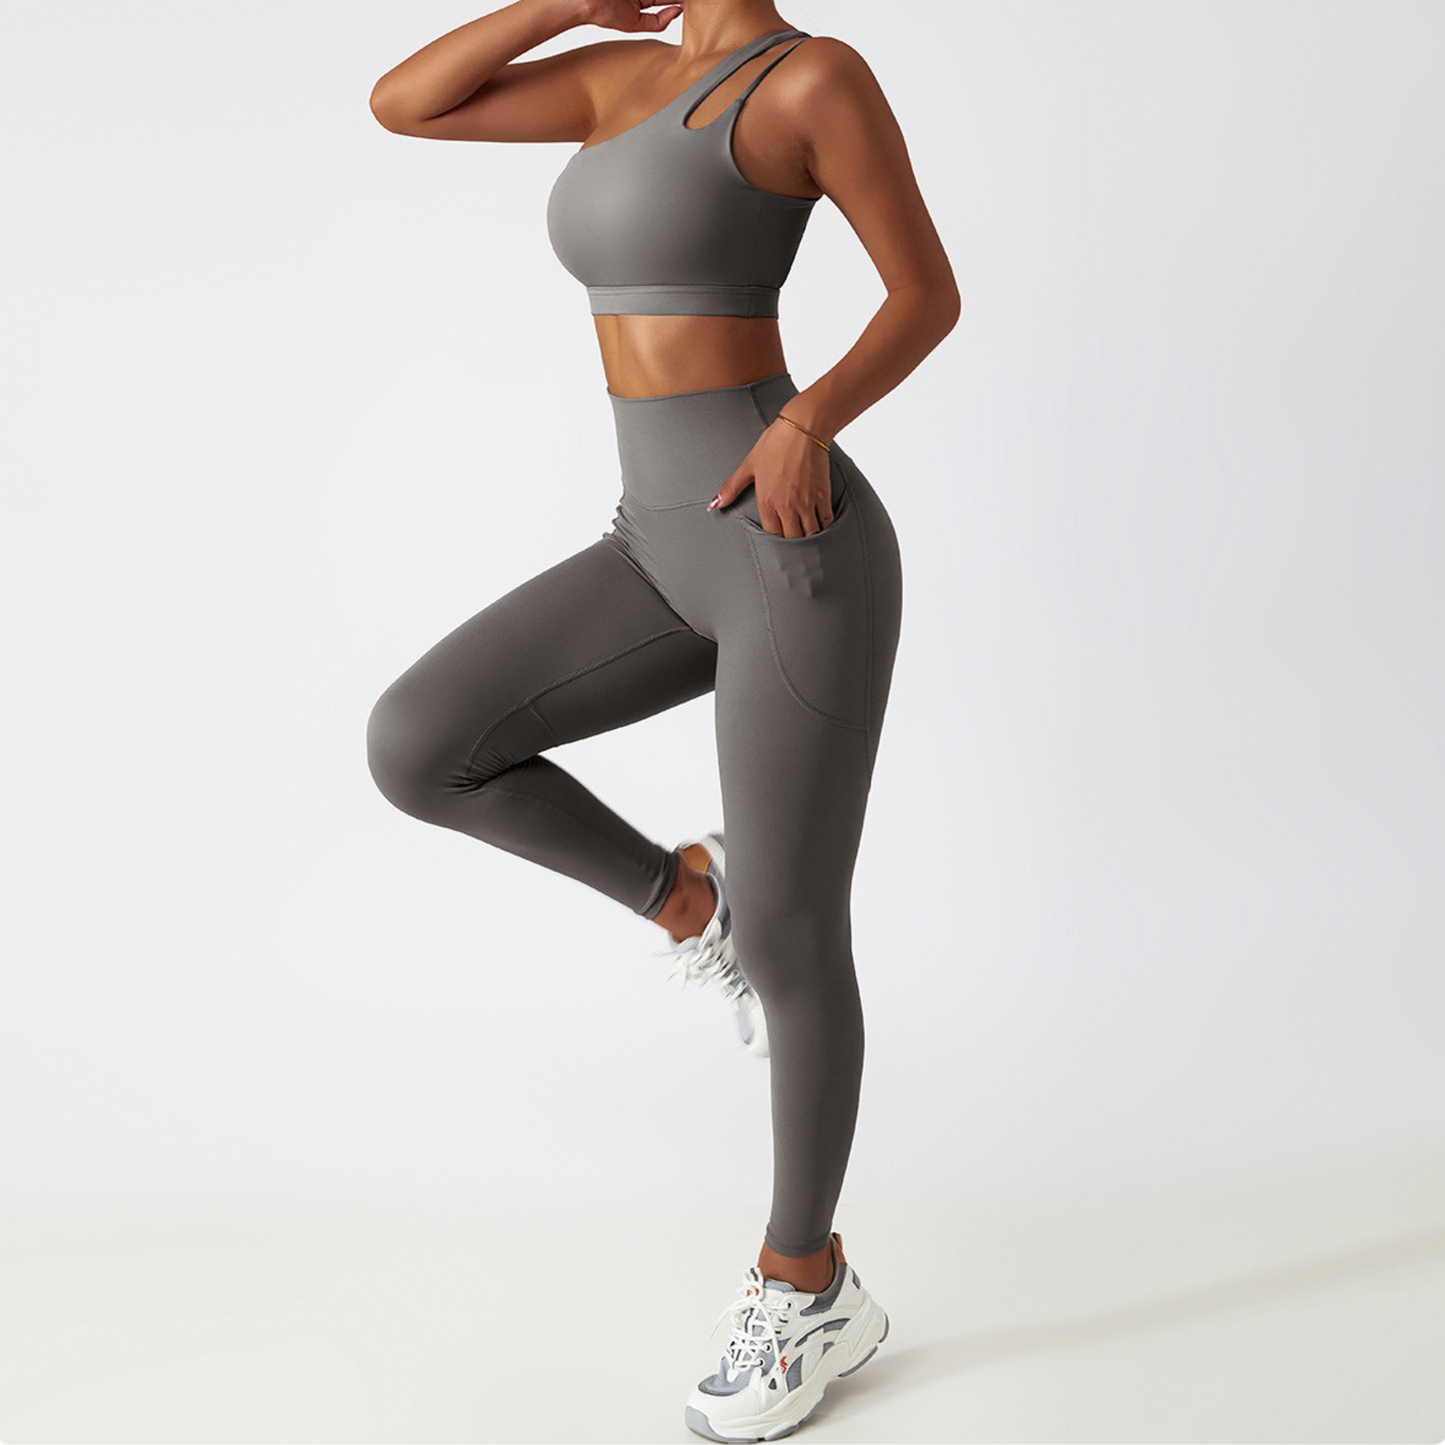 Fitness model wearing a one shoulder, sexy and squat proof matching set in the colour grey from vibras activewear.